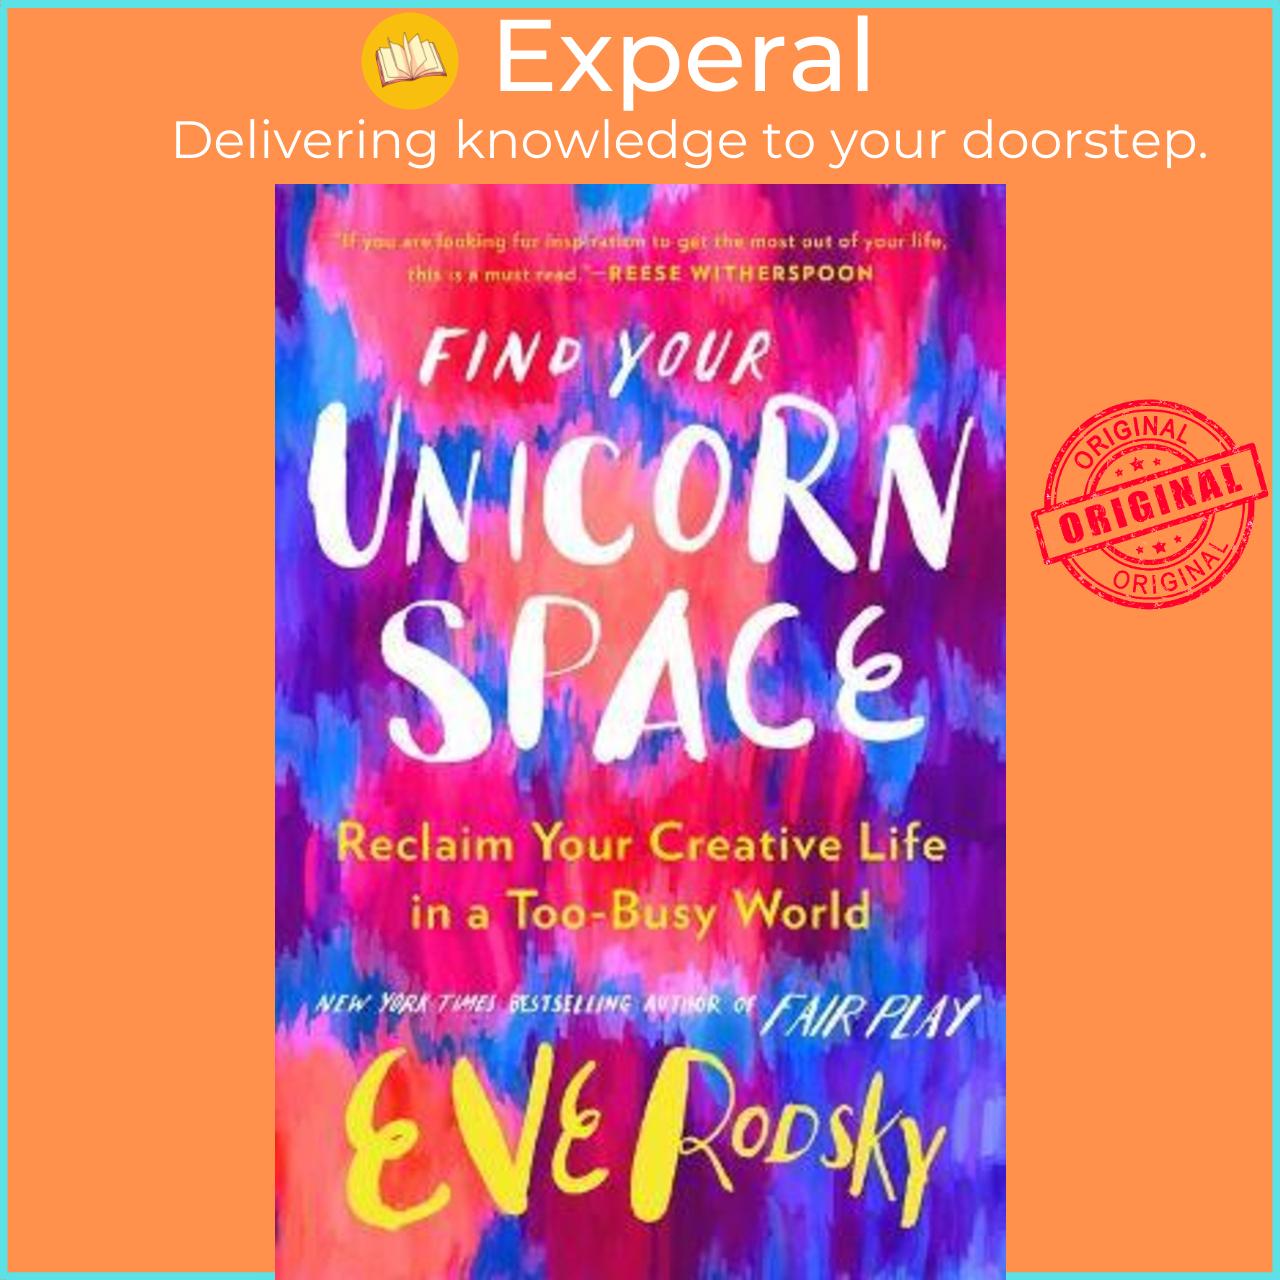 Sách - Find Your Unicorn Space : Reclaim Your Creative Life in a Too-Busy World by Eve Rodsky (US edition, hardcover)